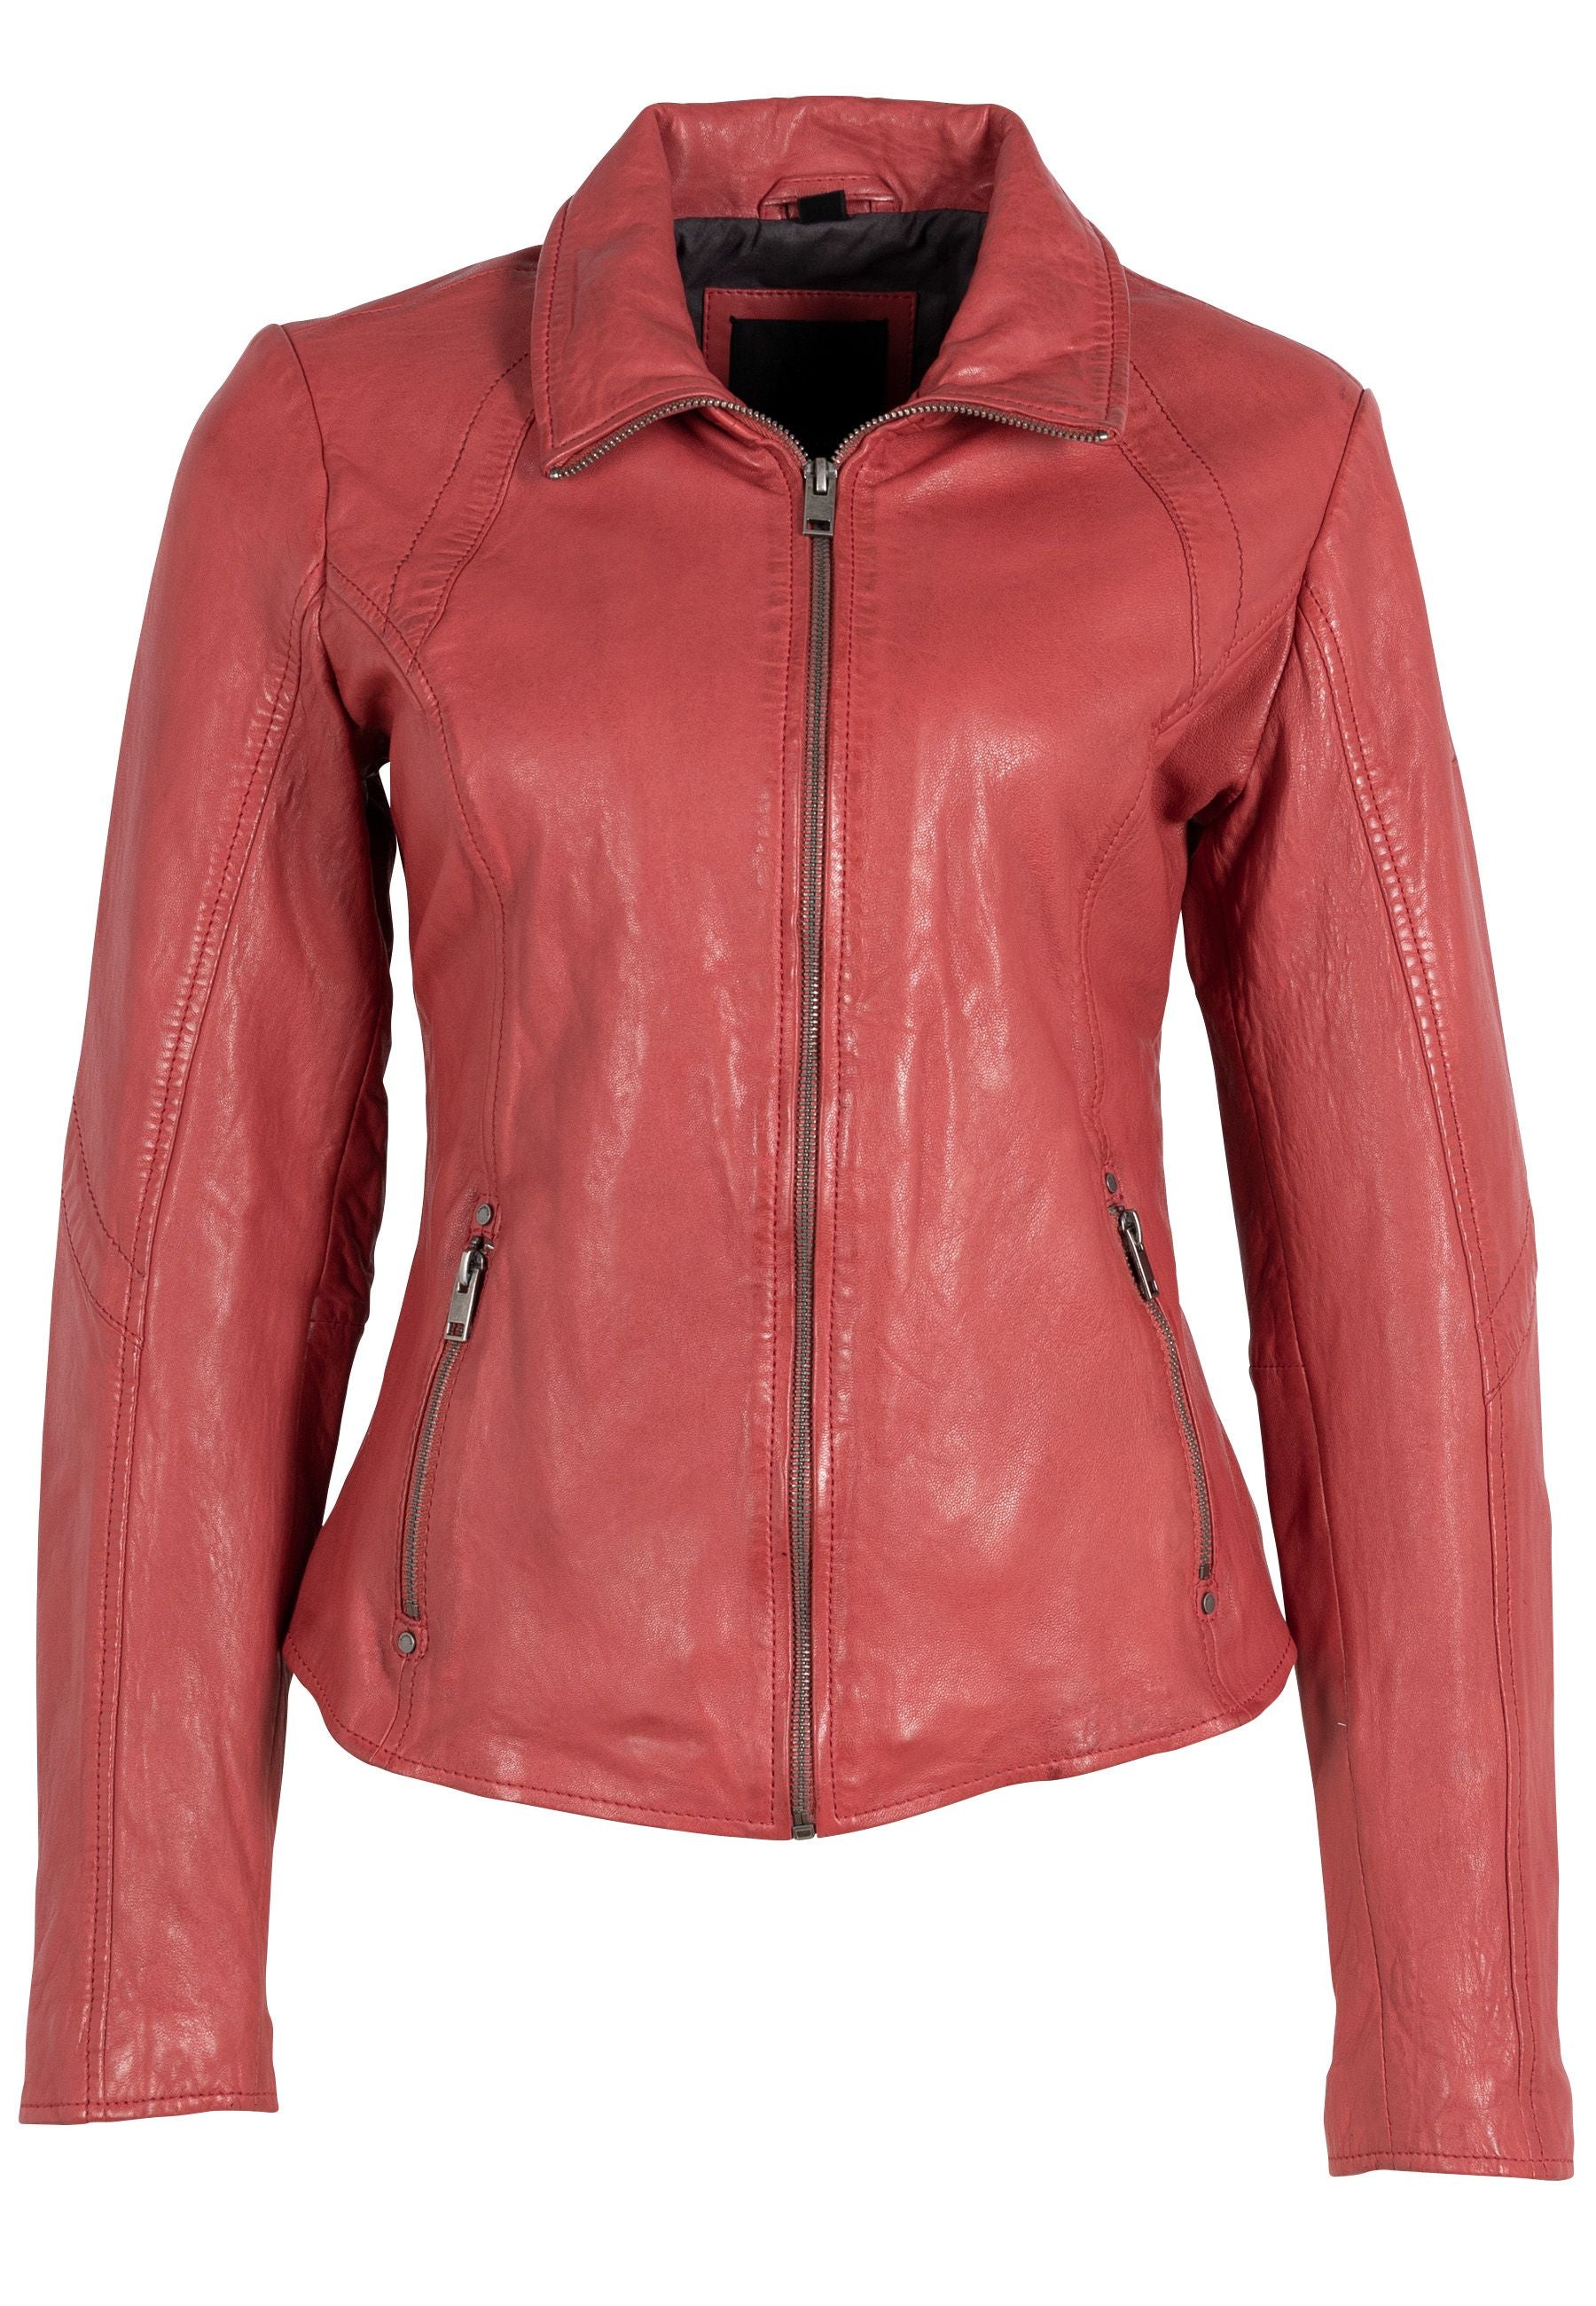 Mauritius Women's Red Else Rf Leather Jacket, Astro Dust